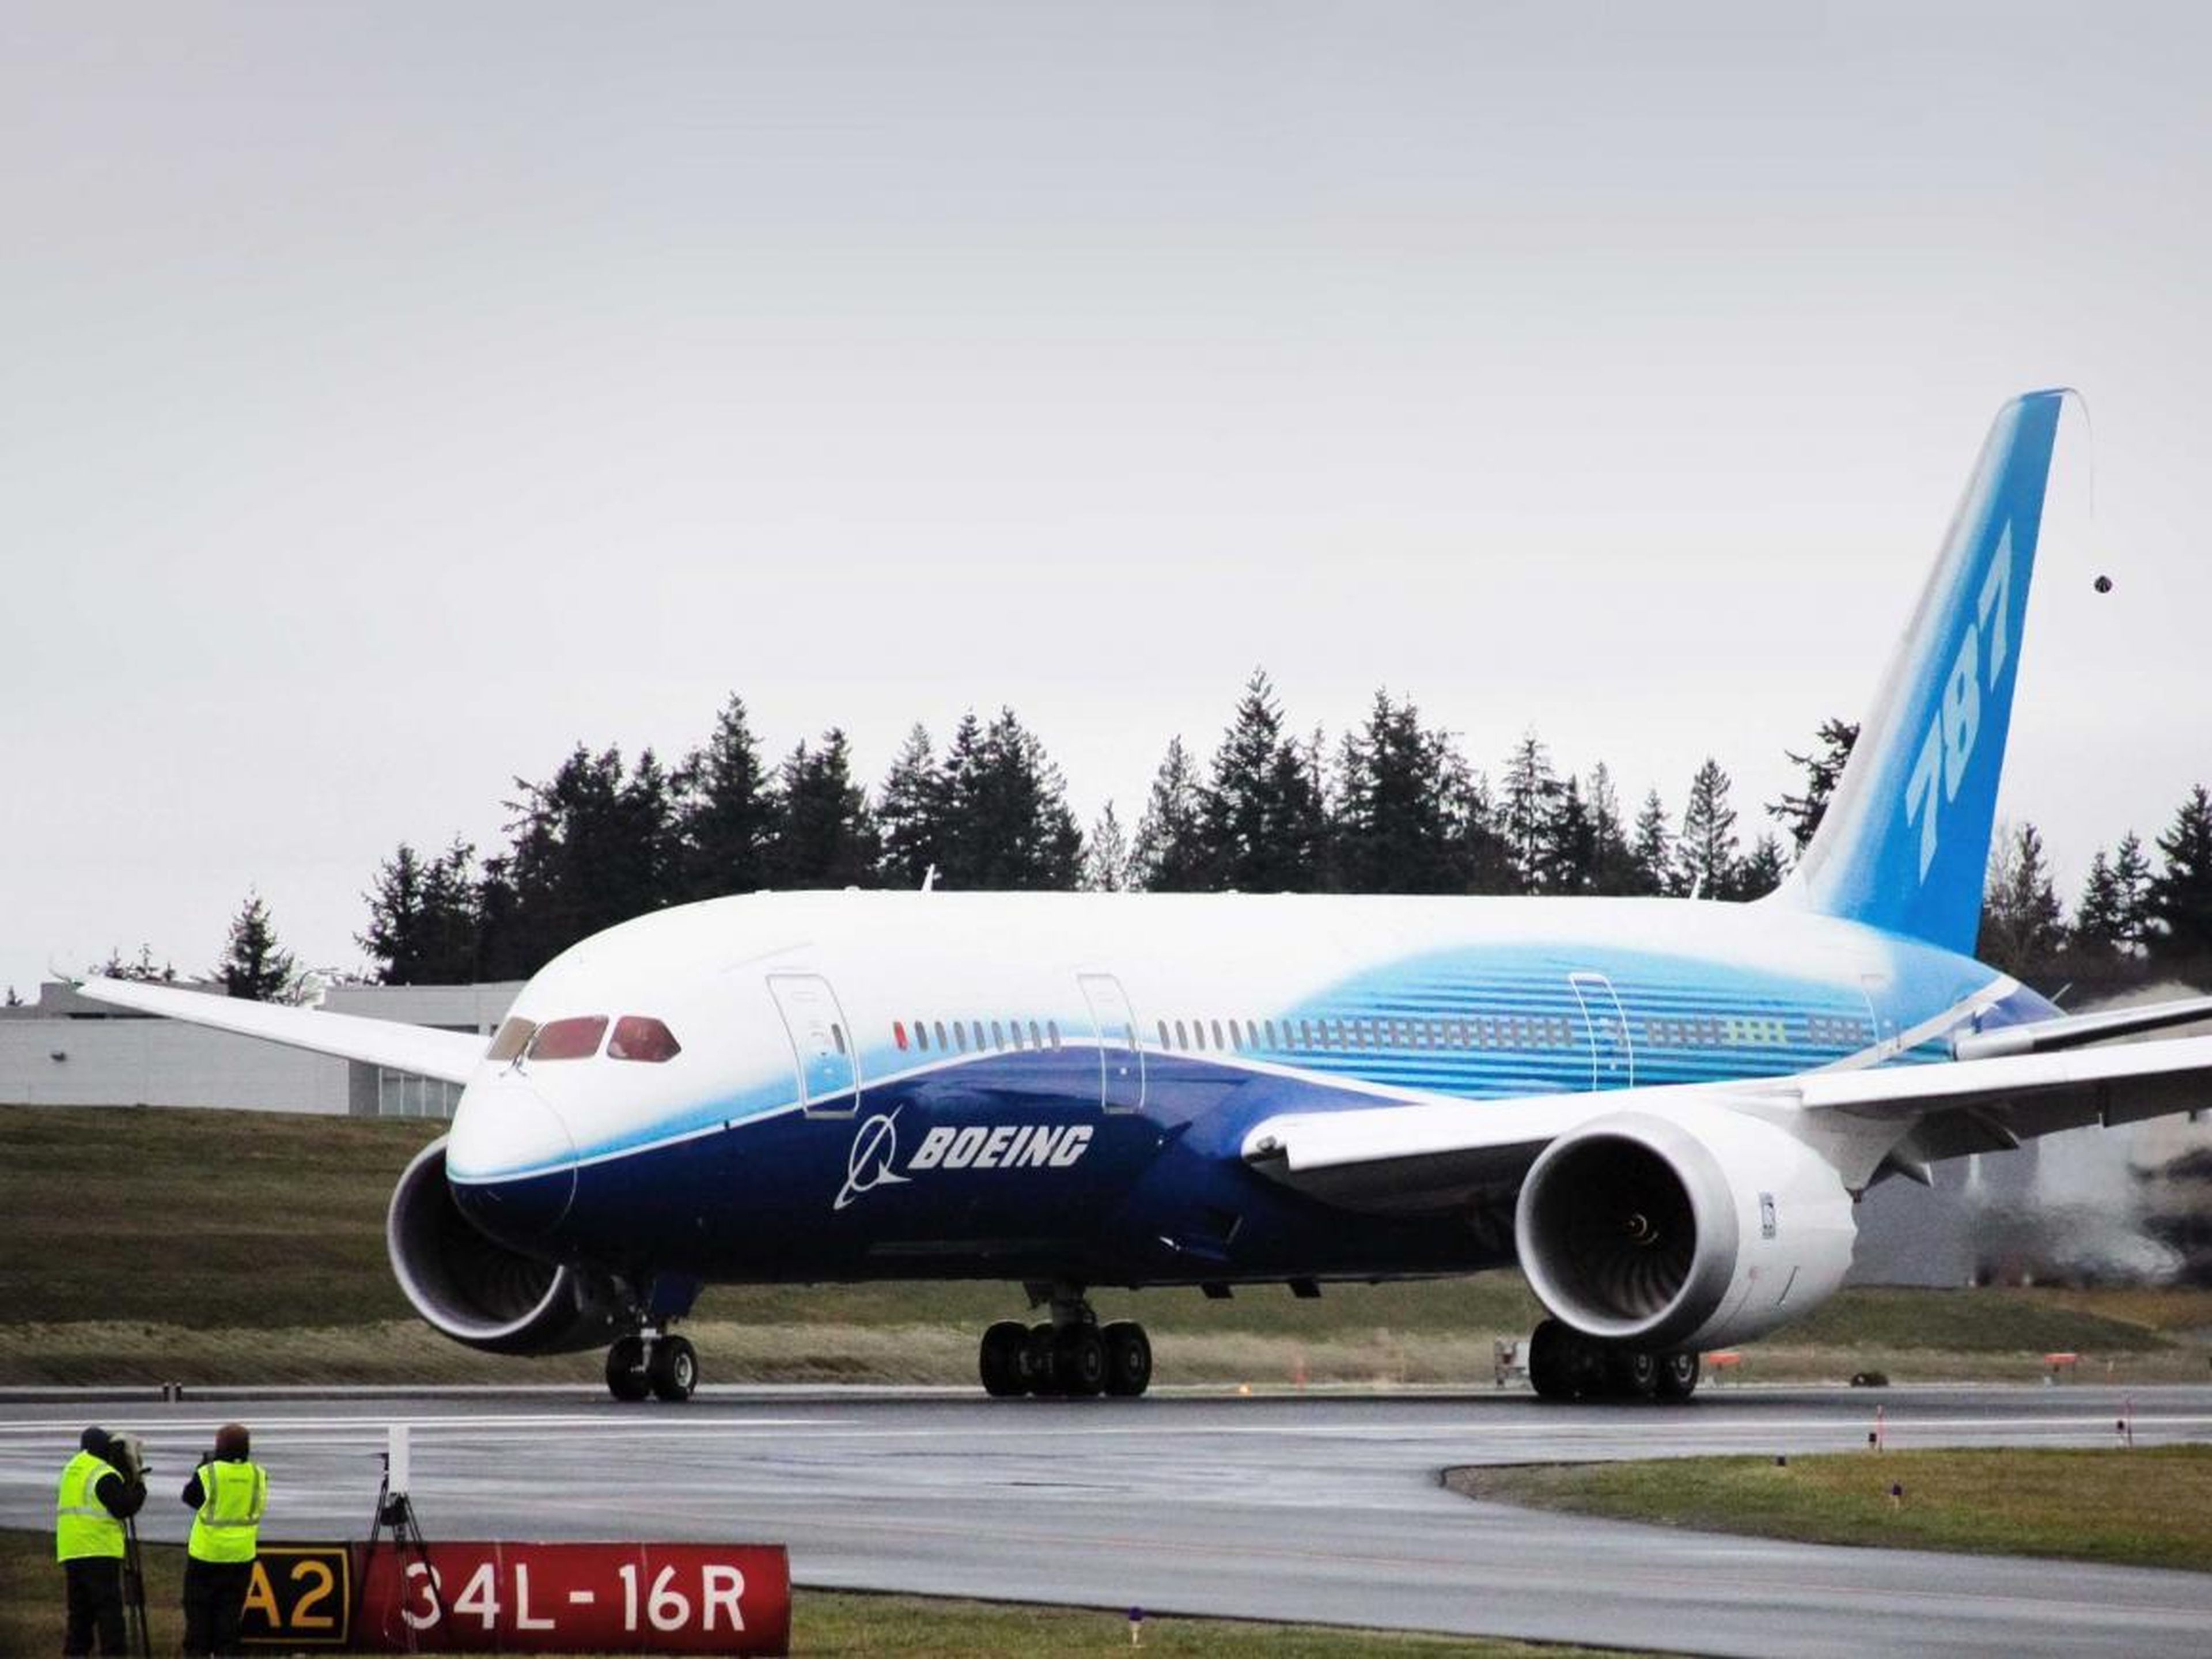 The 787-8 is the smallest of the three Dreamliner variants and carries a list price of $239 million.